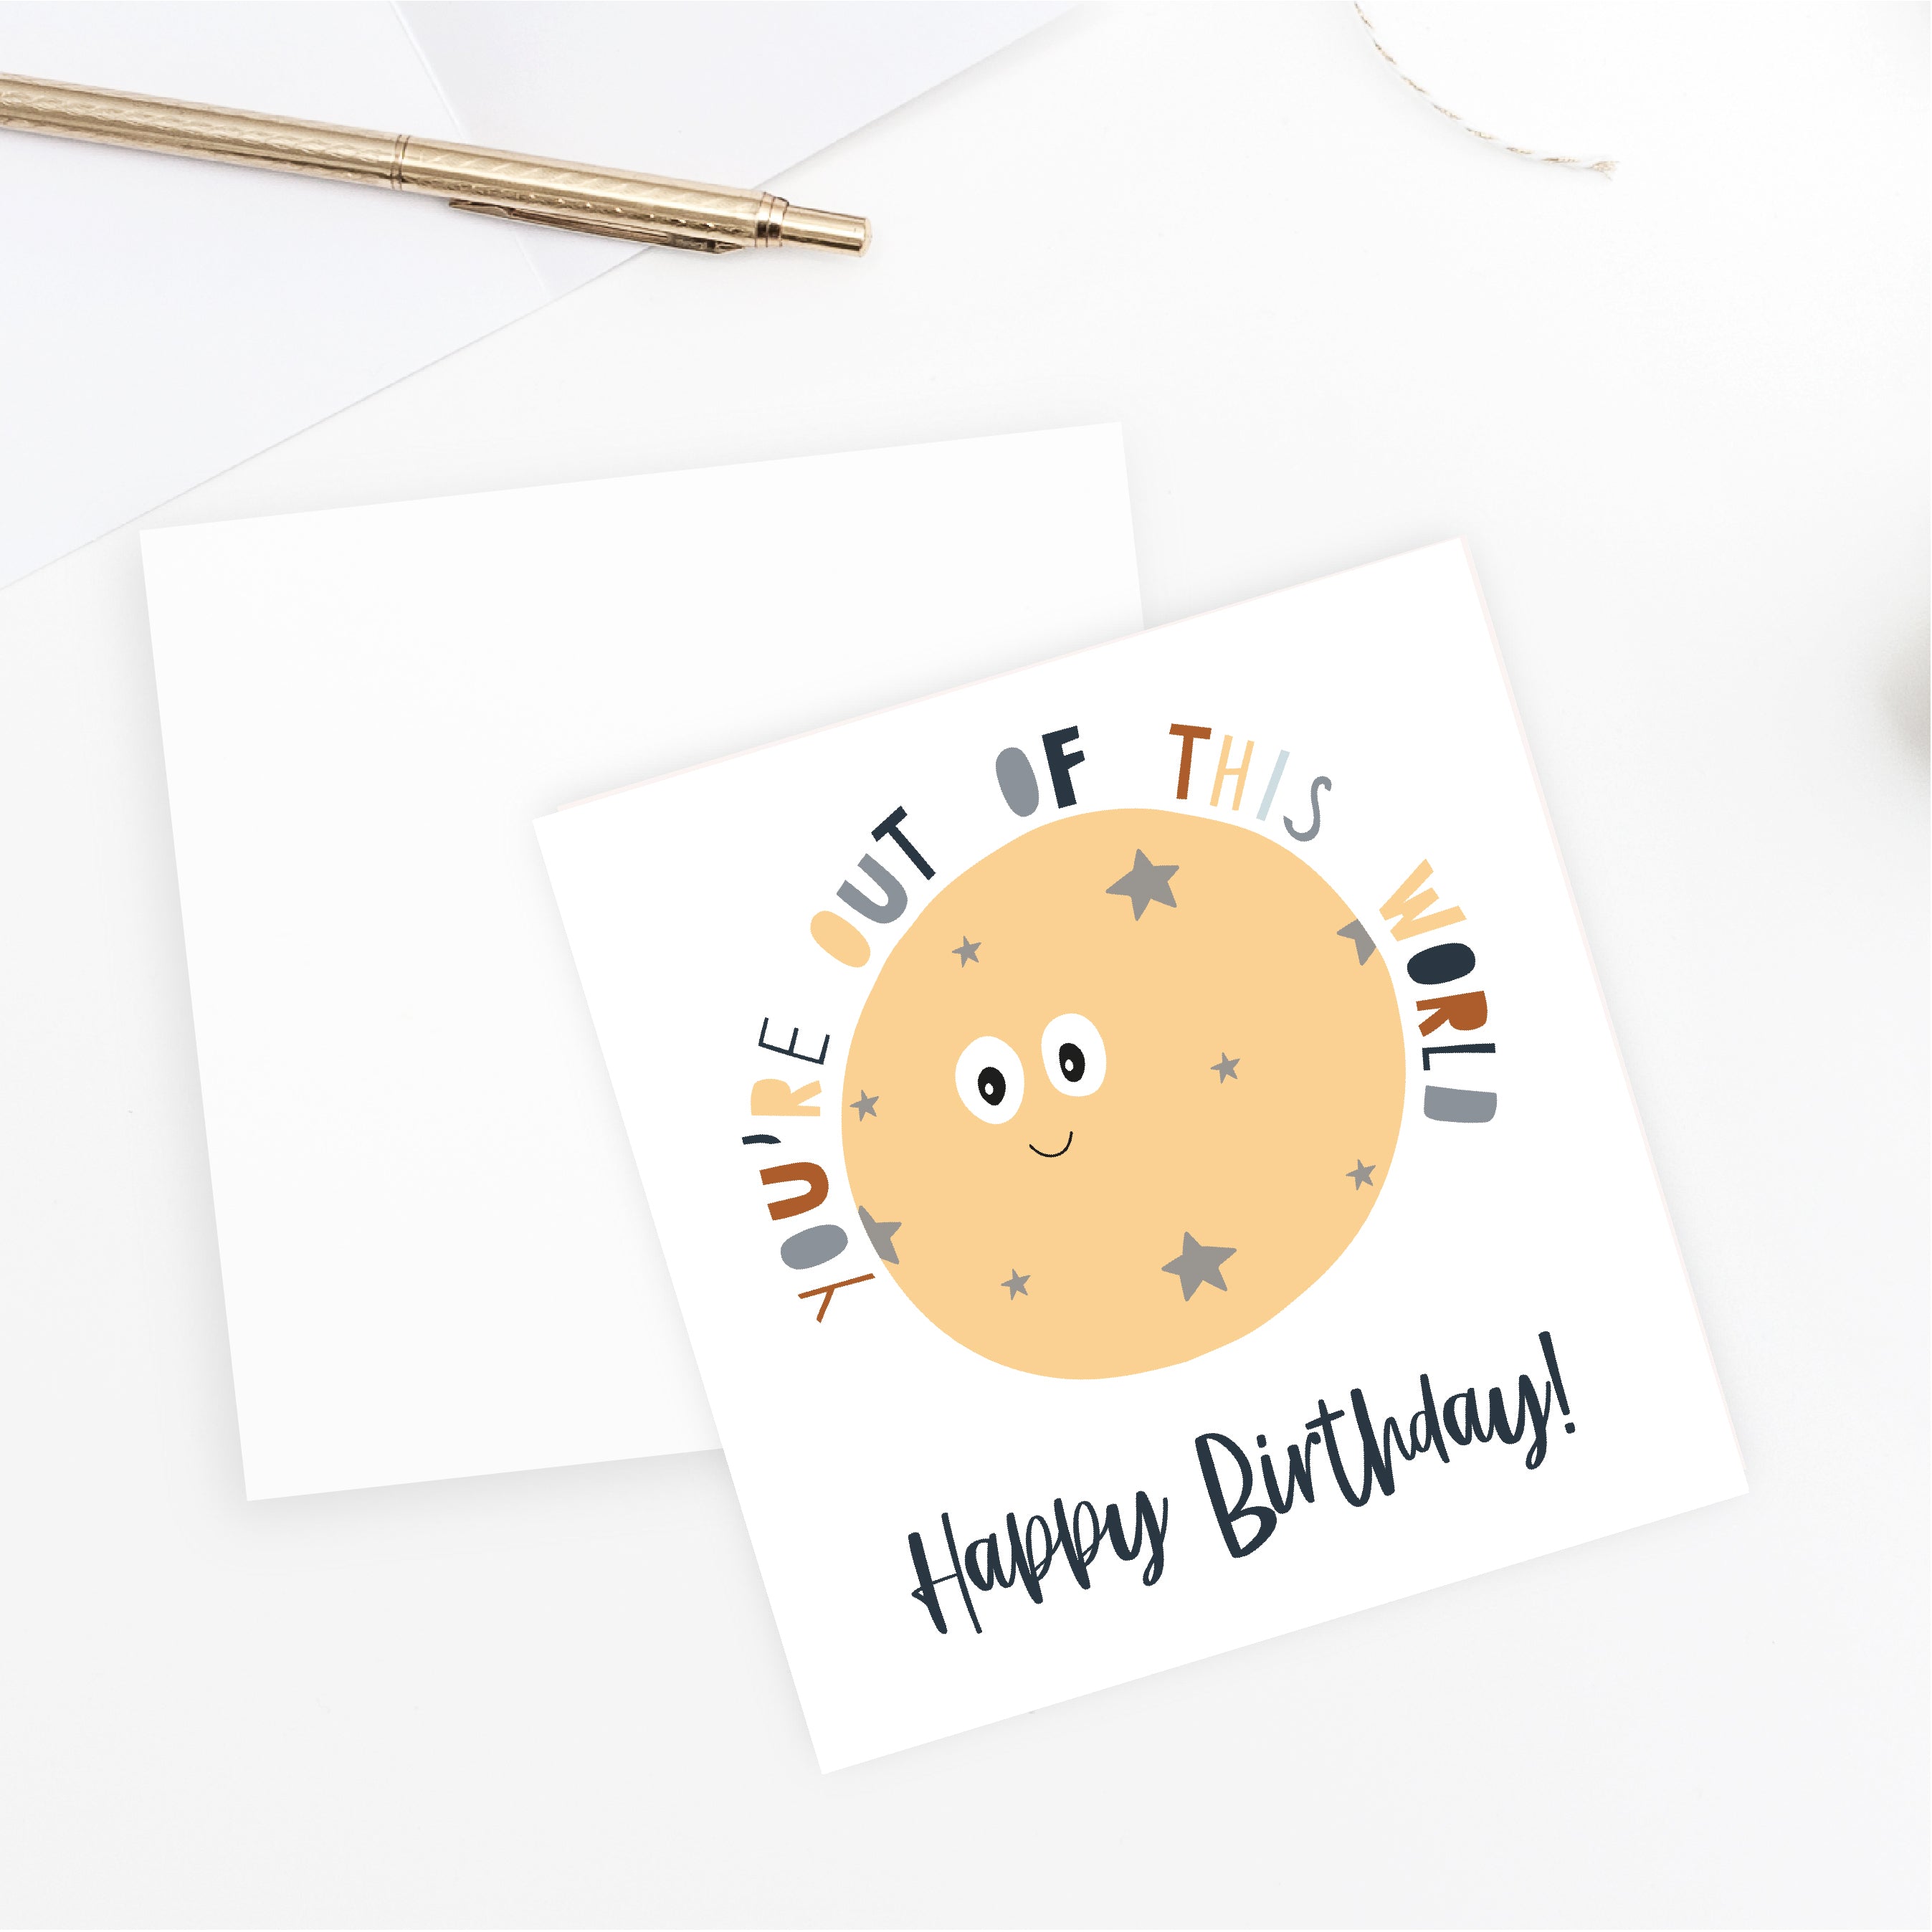 Out of this World - Happy Birthday Card